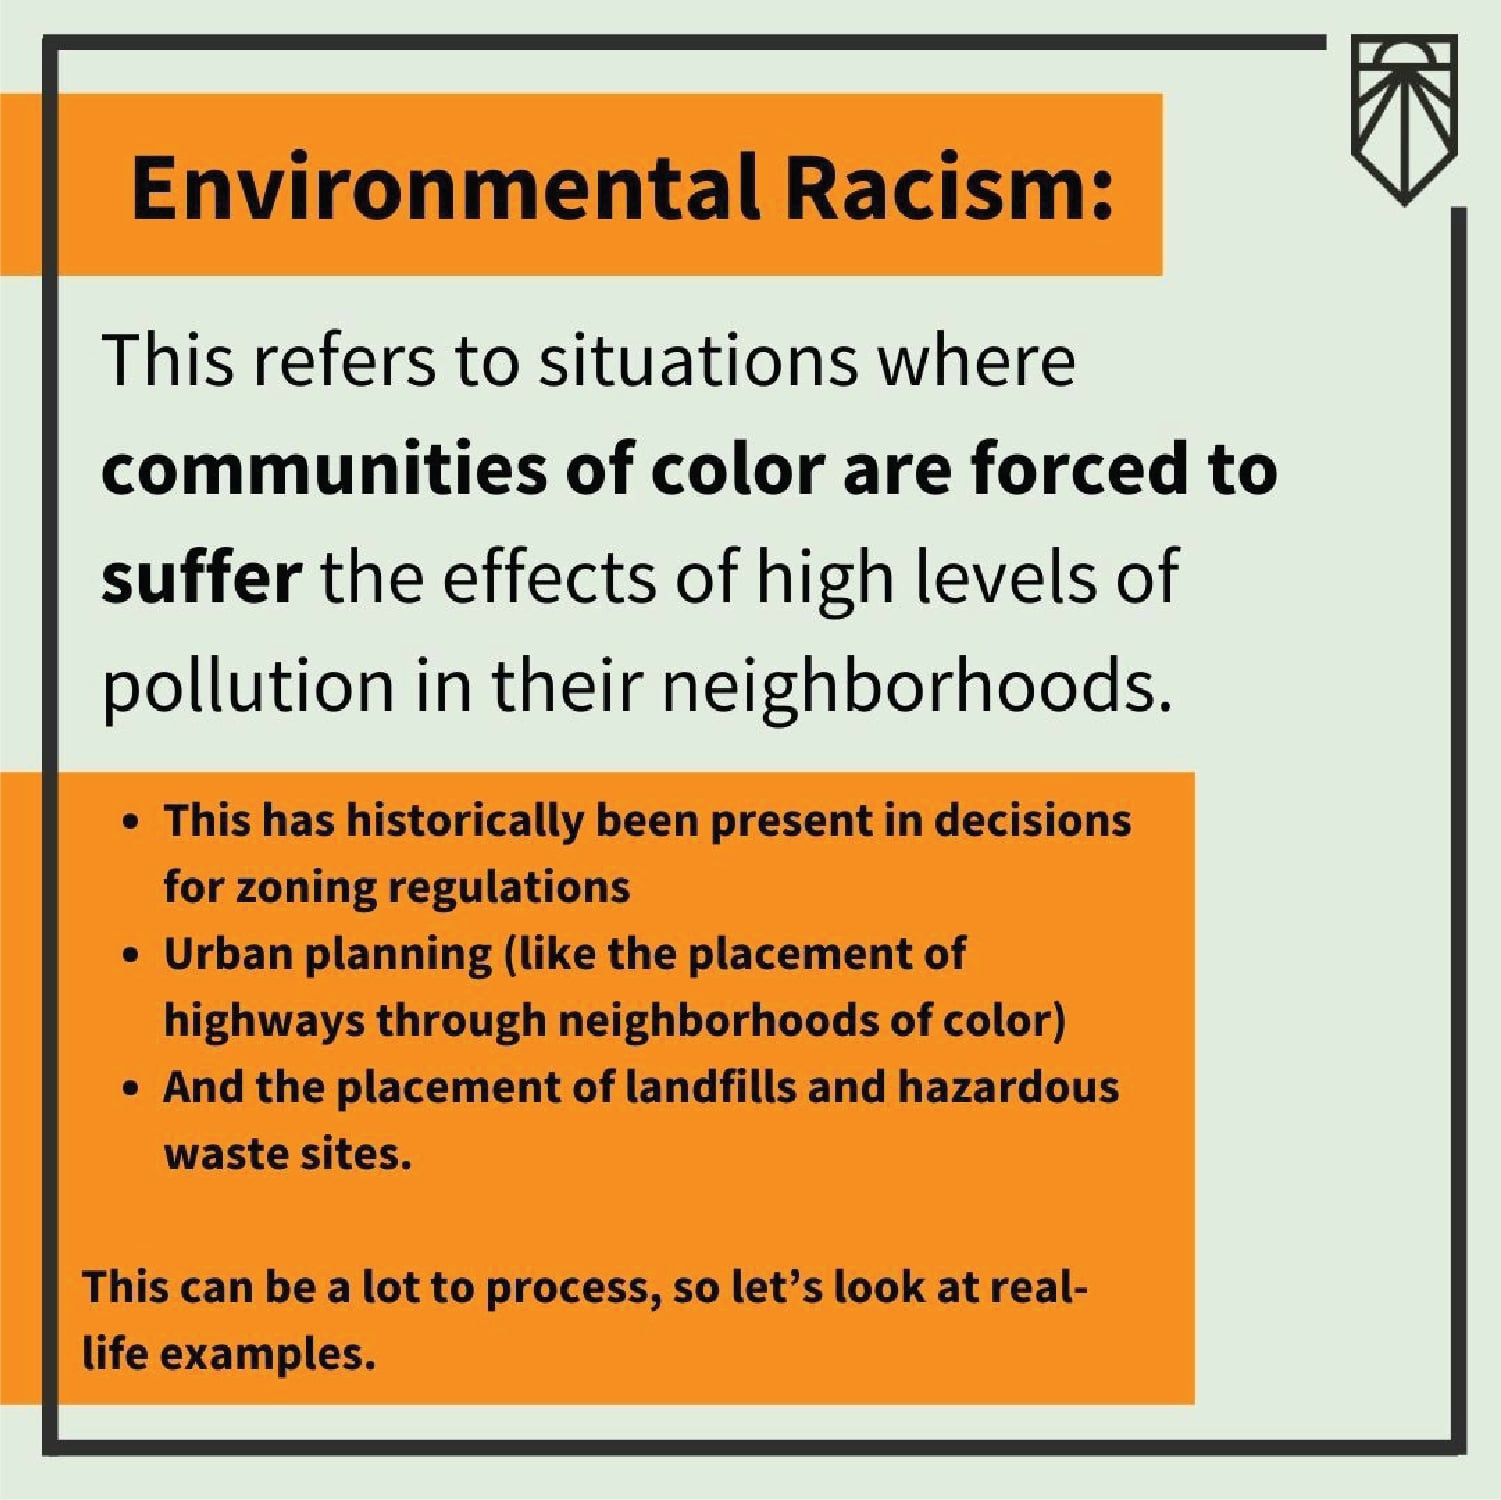 Graphic Reads: This refers to situations where communities of color are forced to suffer the effects of high levels of pollution in their neighborhoods. This has historically been present in decisions for zoning regulations Urban planning (like the placement of highways through neighborhoods of color) And the placement of landfills and hazardous waste sites. This can be a lot to process, so let’s look at a real-life example.